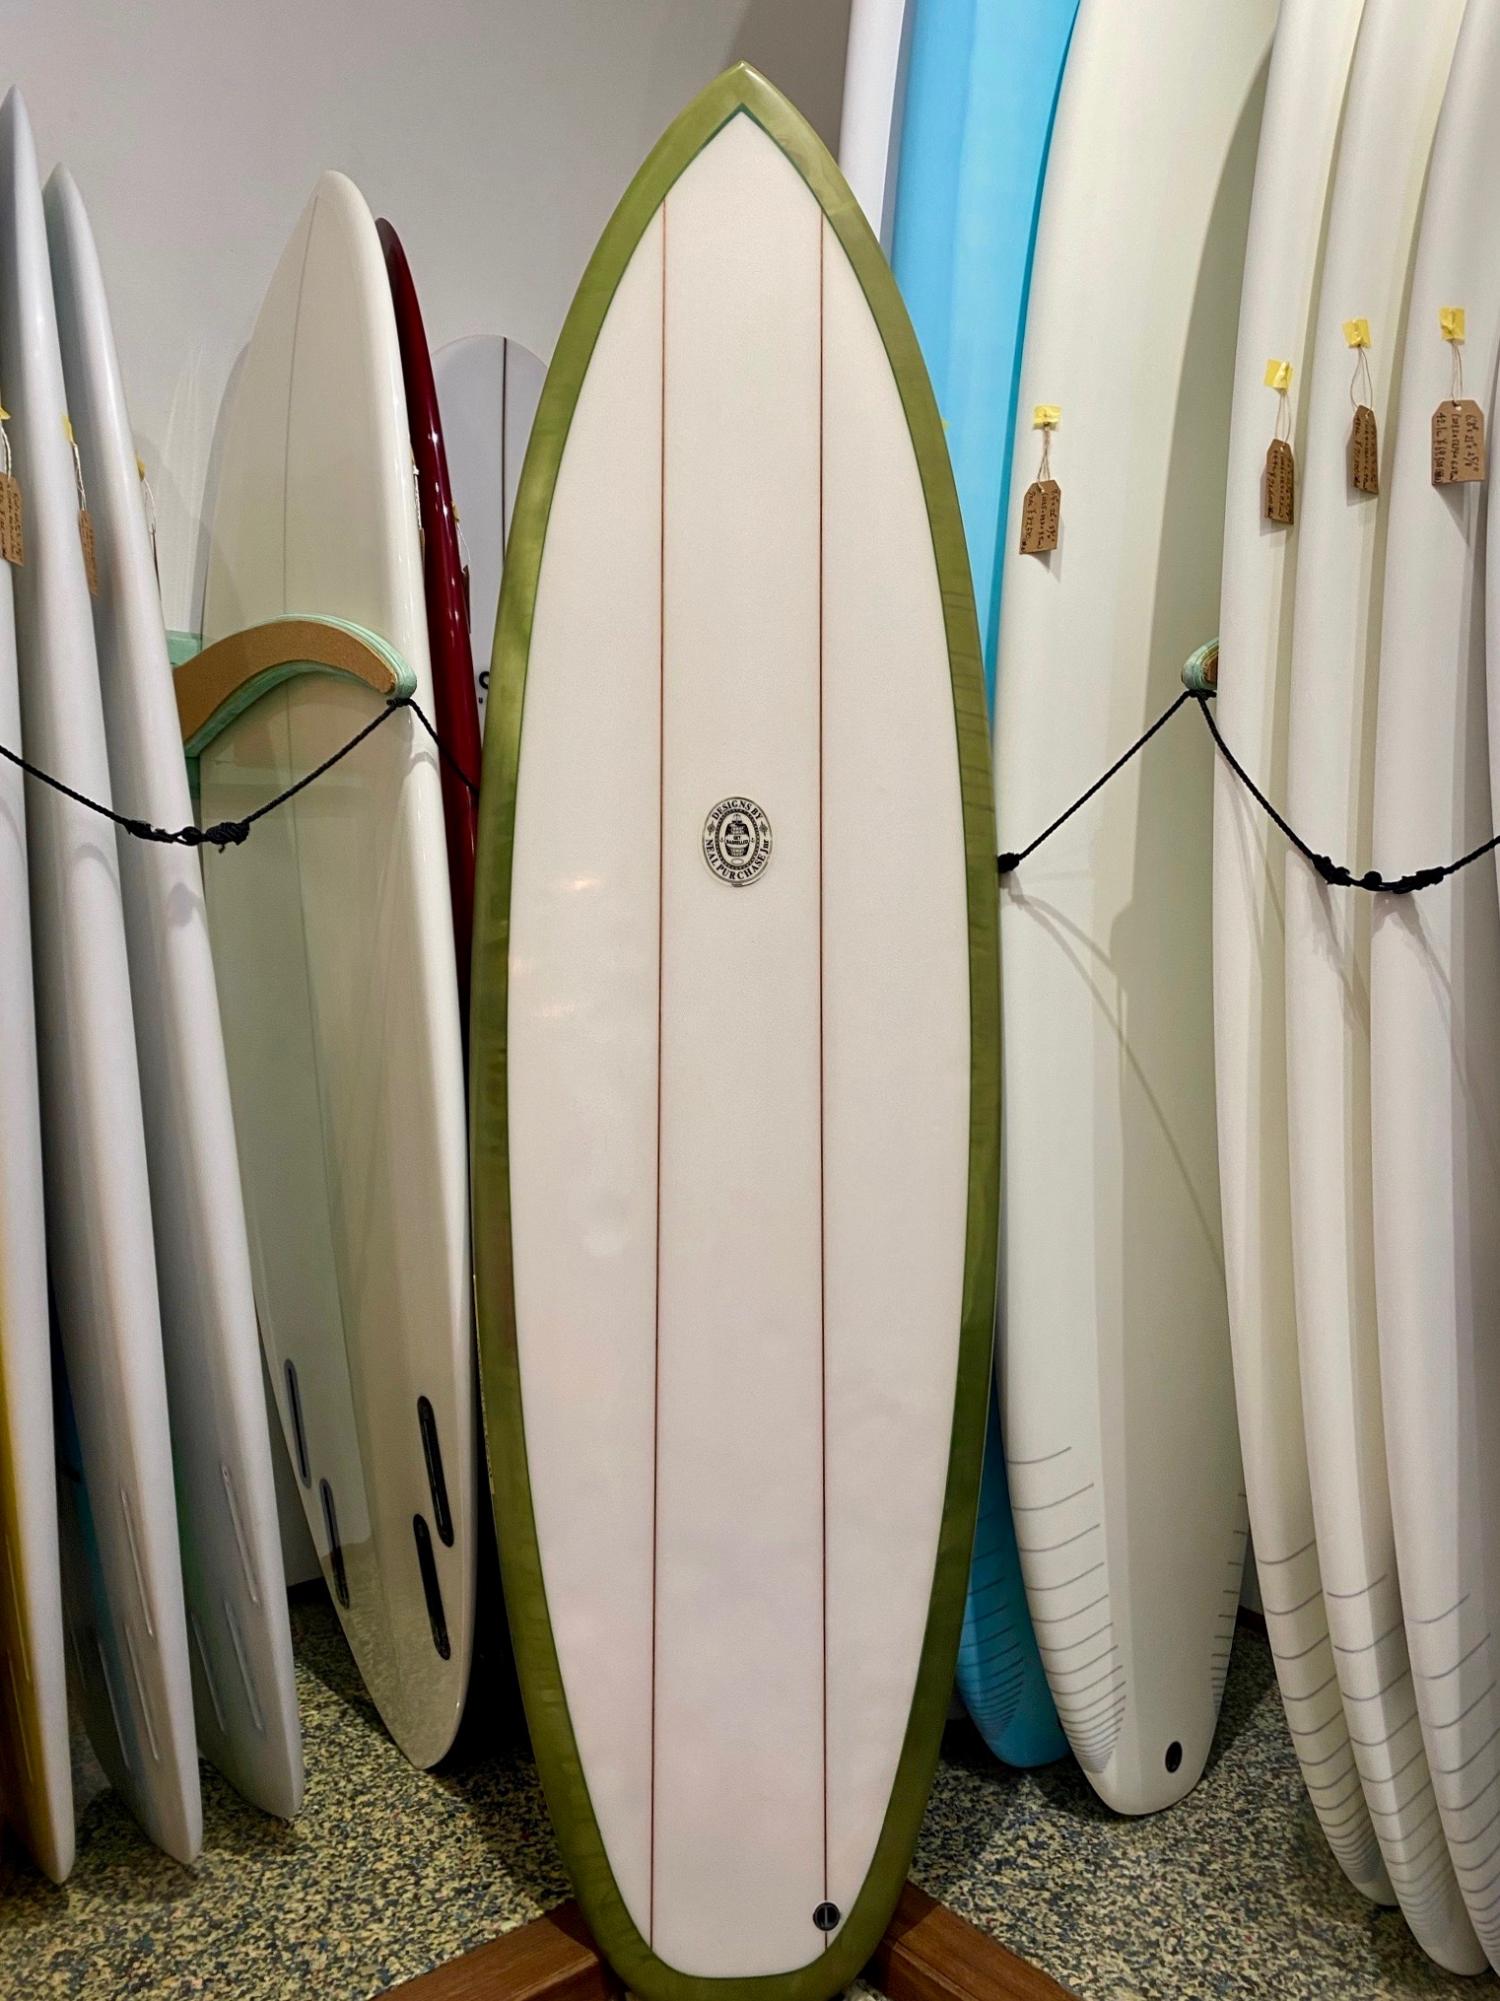 USED BOARDS DUO 5.8 [Neal Purchase Jnr Surfboards]　